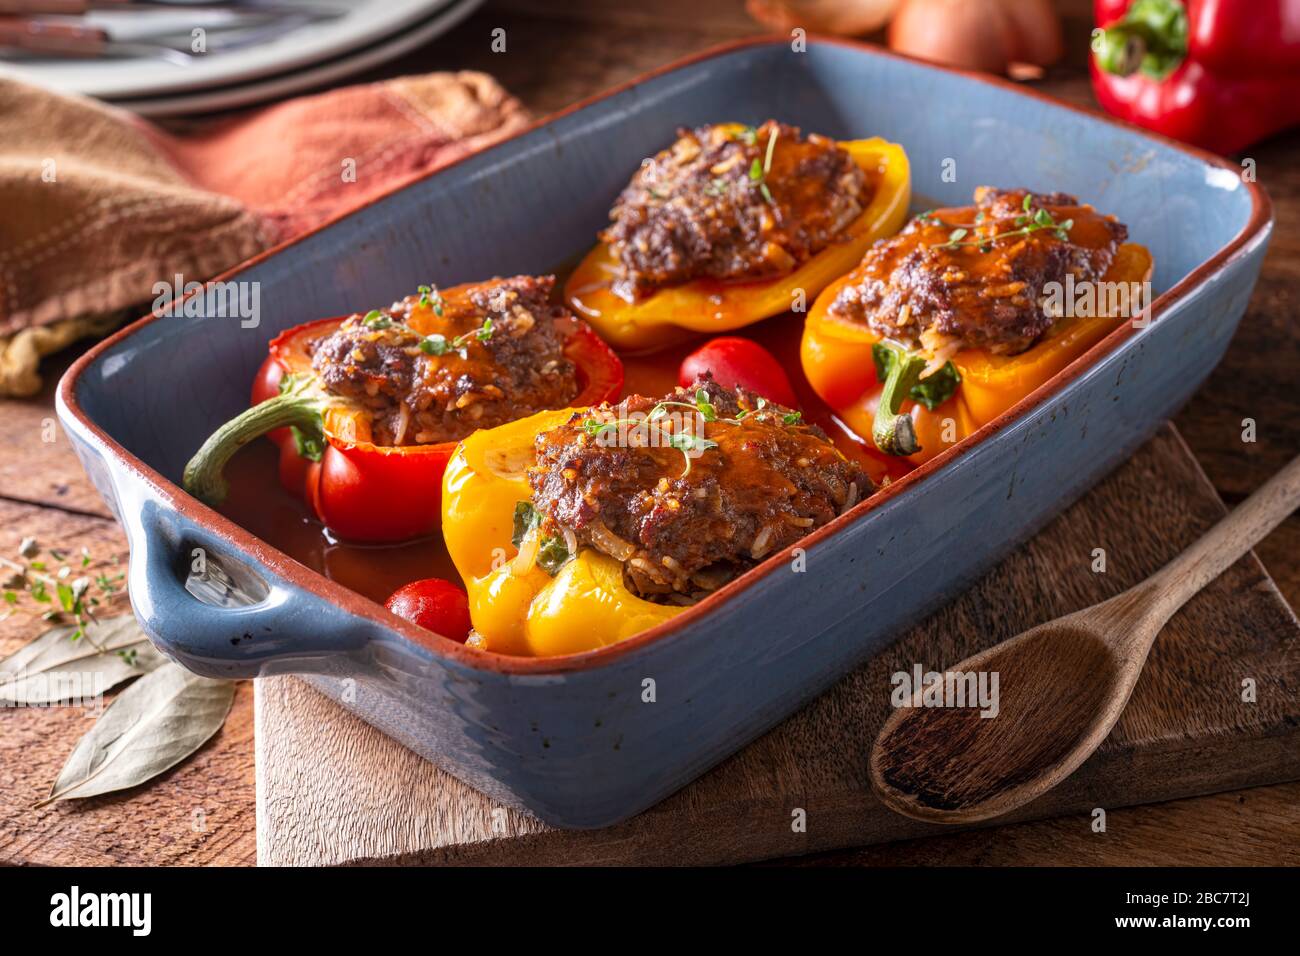 Delicious homemade stuffed peppers in savory tomato sauce. Stock Photo